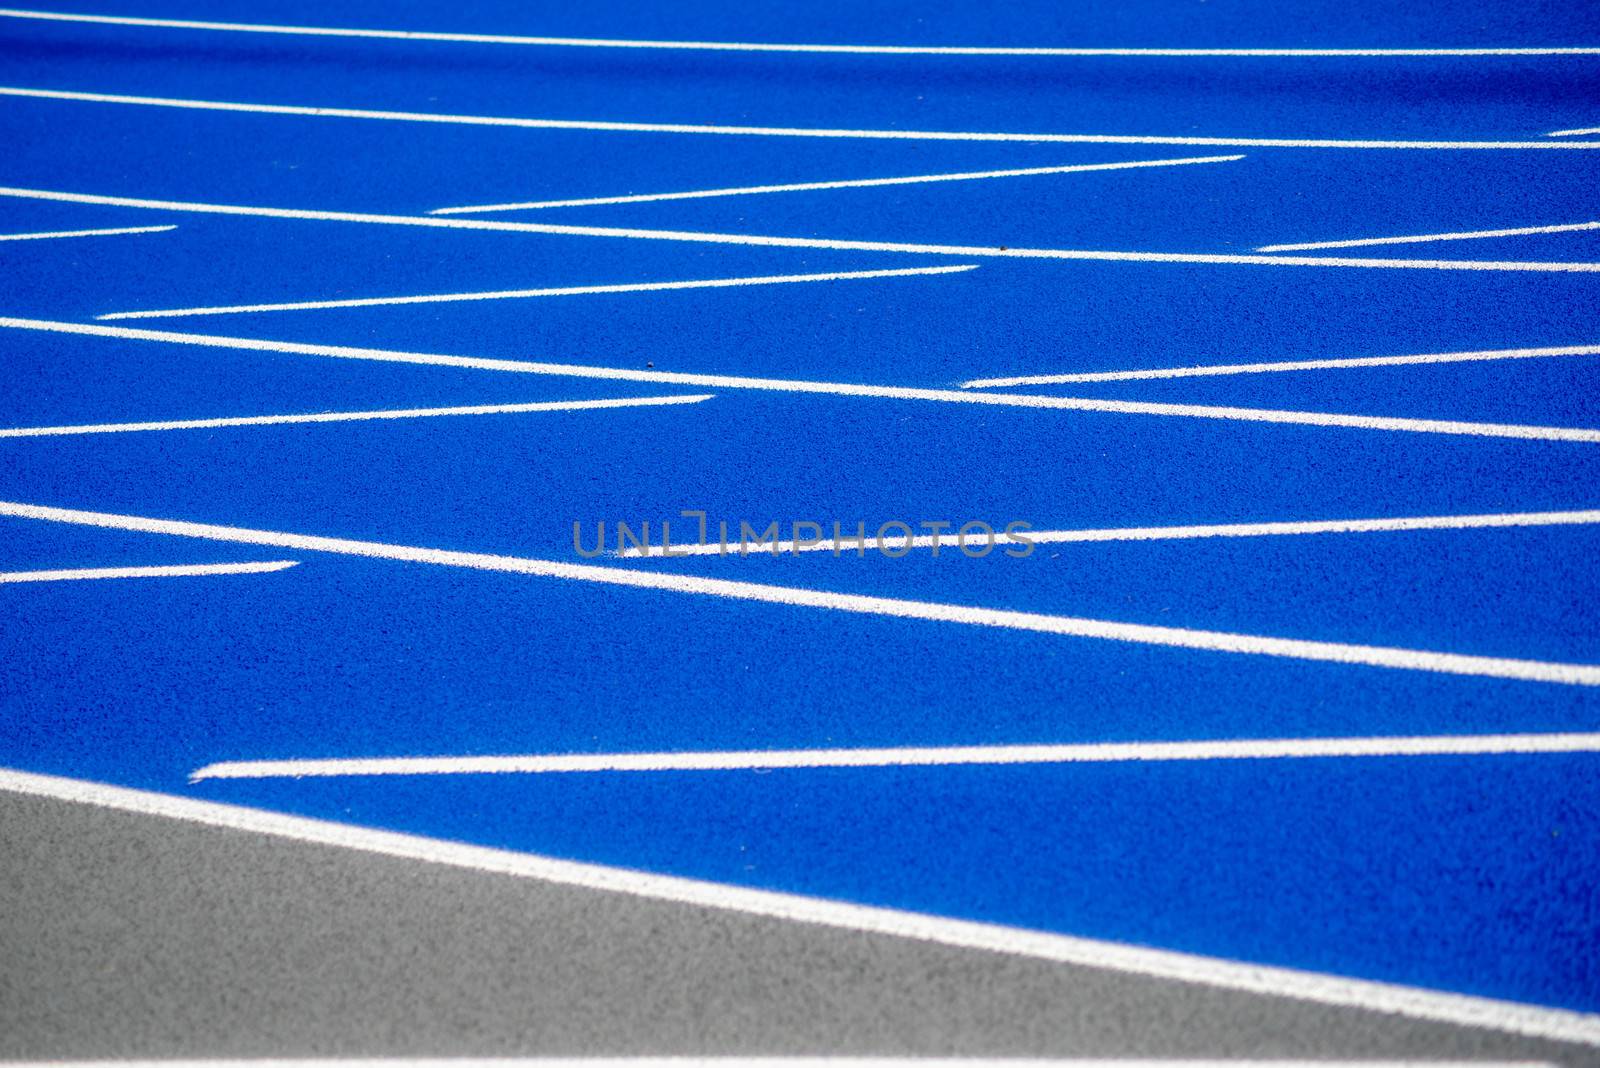 Full frame image in natural light of textured surface of a clean, new outdoor blue running track with white lines and copy space.